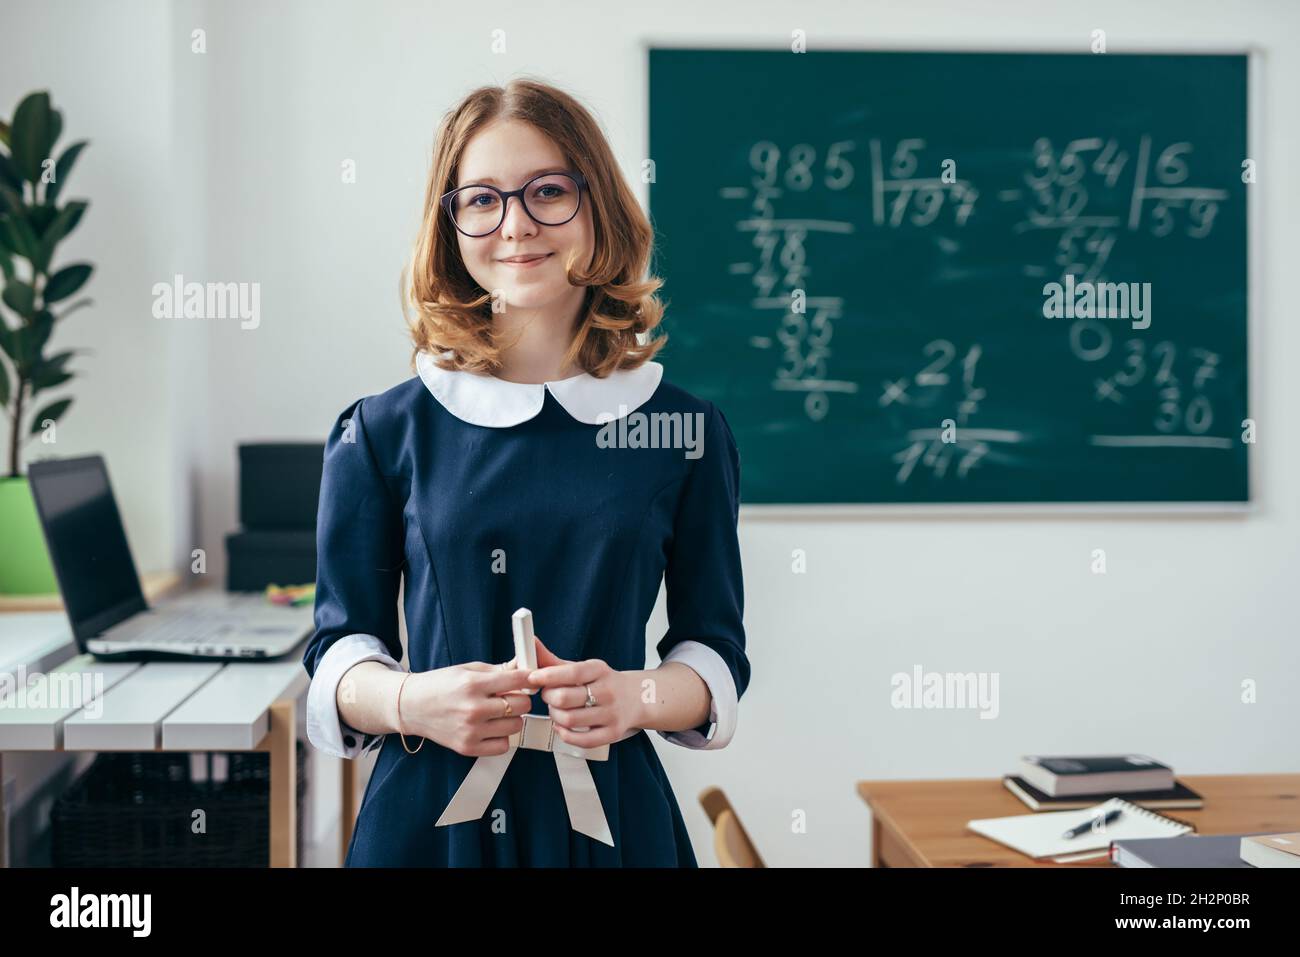 Portrait of smiling school girl with chalk in her hands Stock Photo